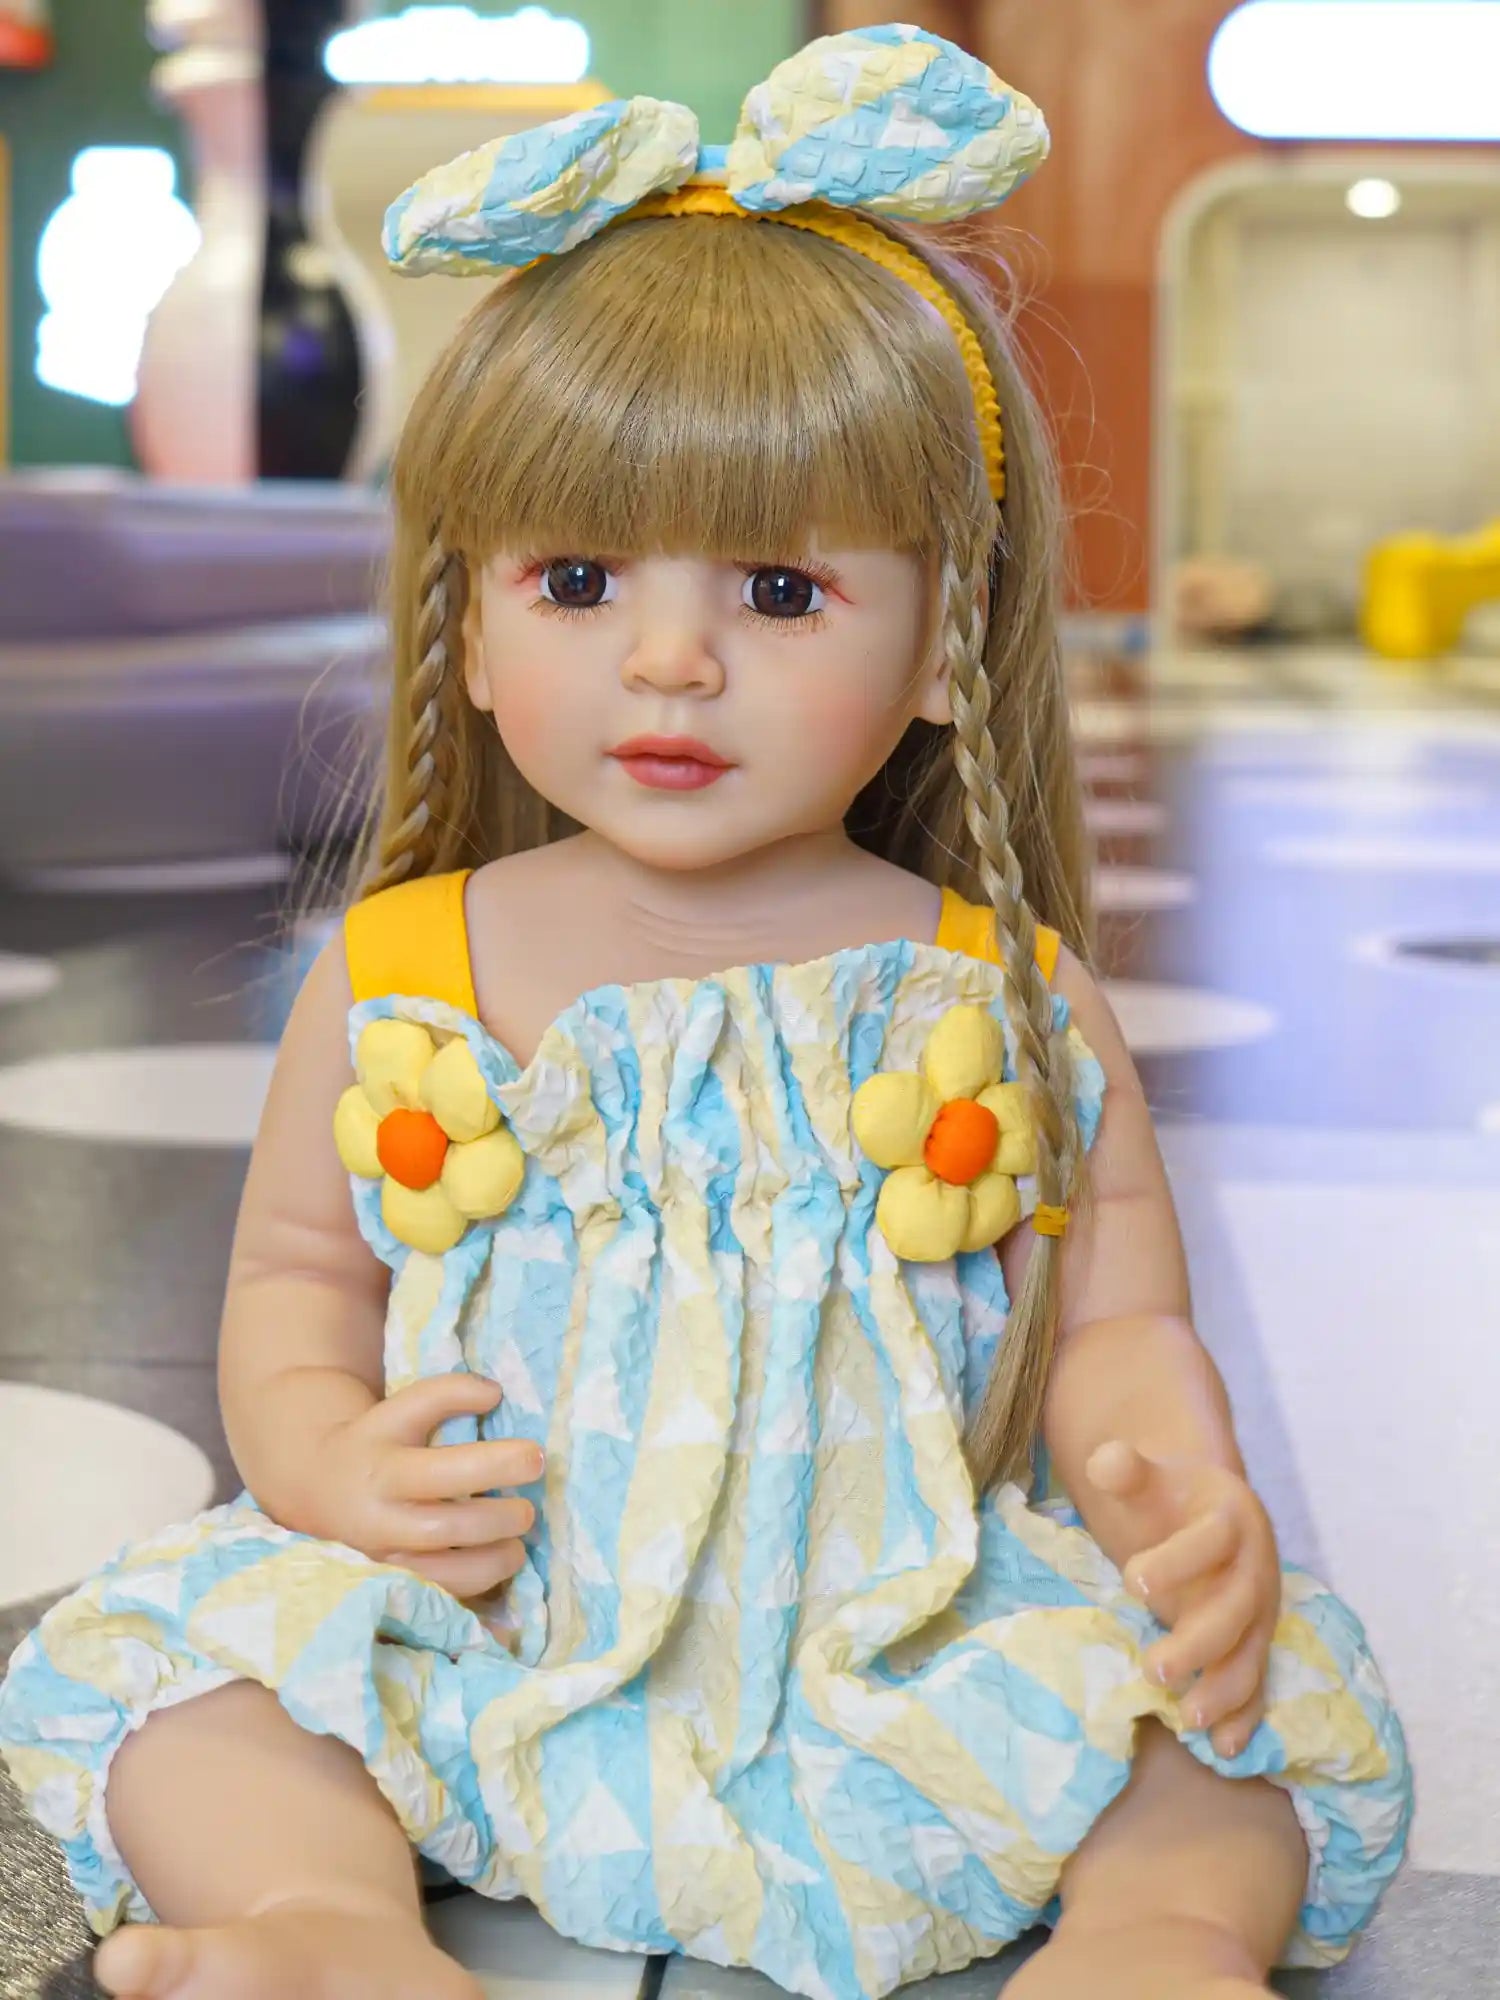 Doll with braided blonde hair in a blue ruffled dress, seated on the floor.